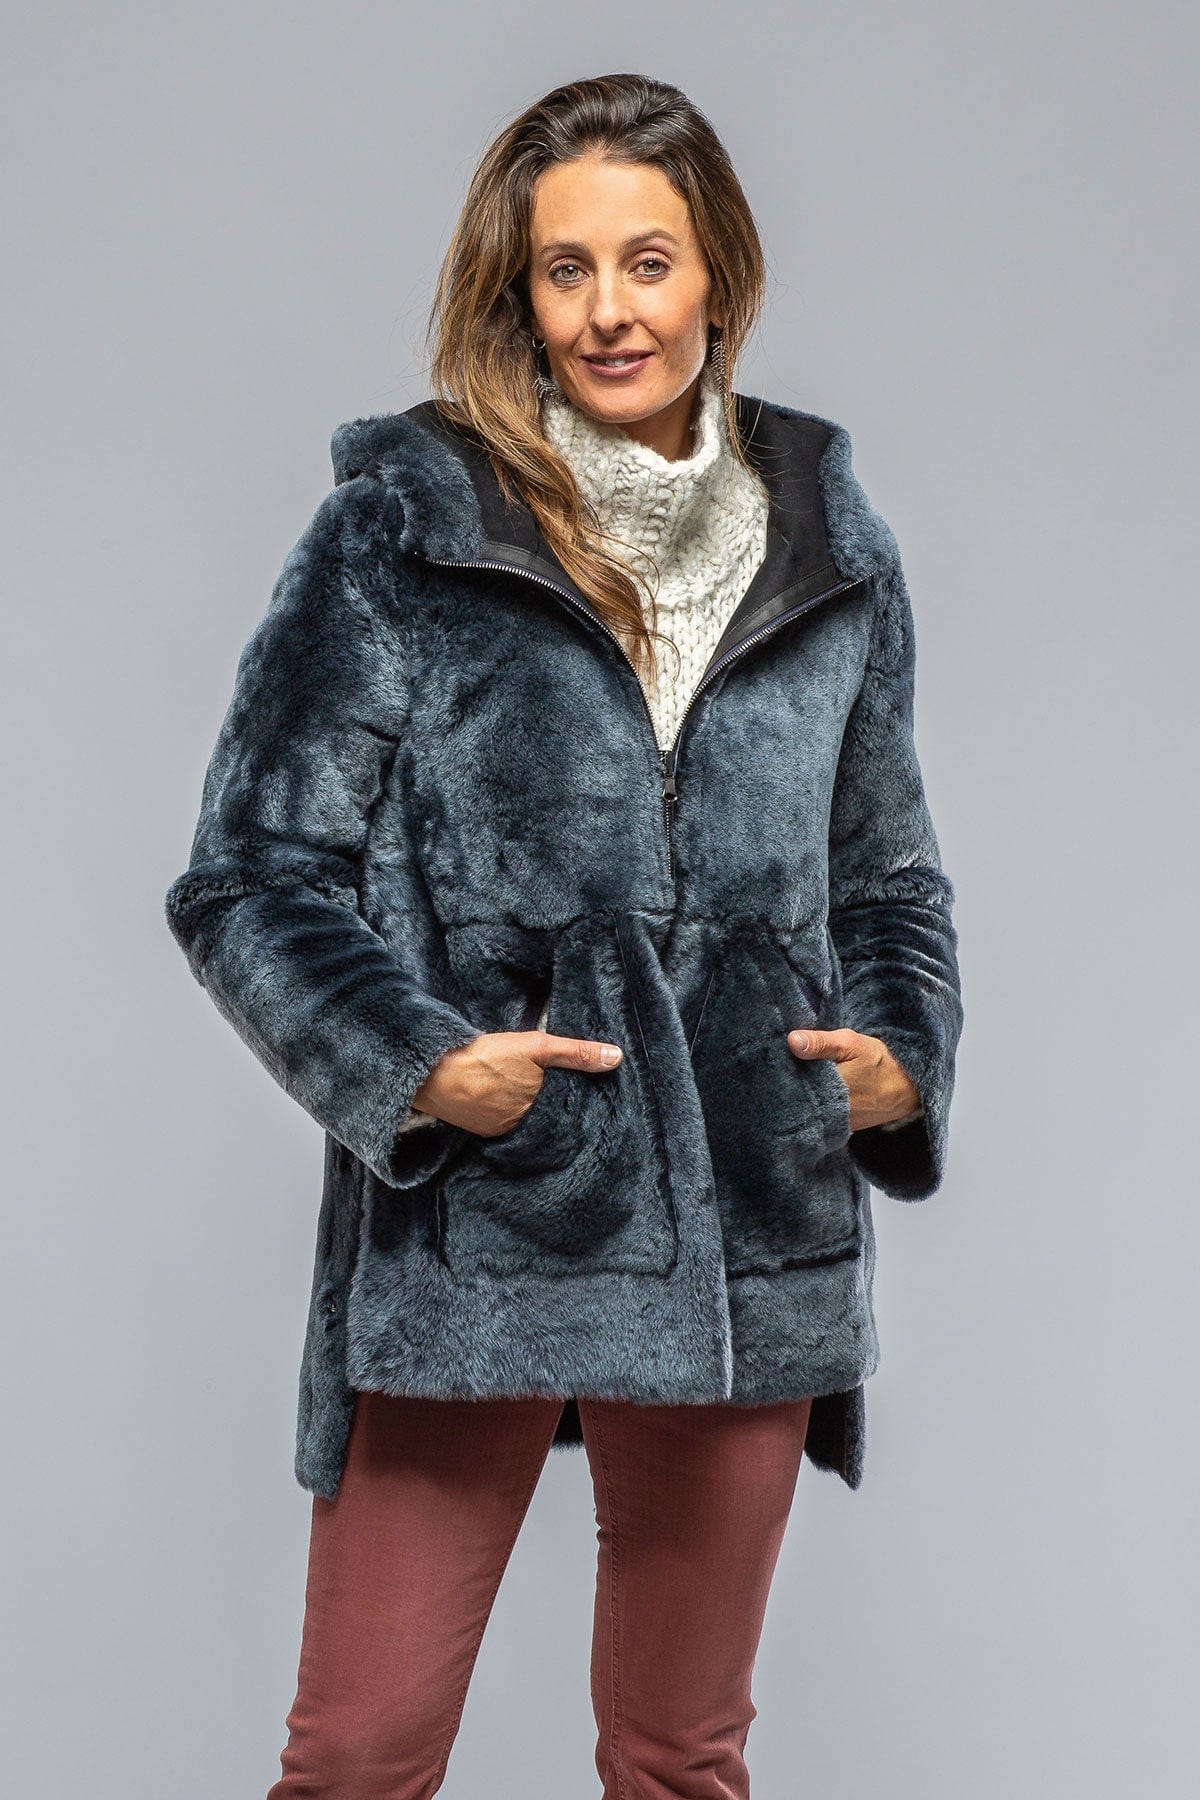 Trentino Reversible Side Snap Shearling In Navy - AXEL'S